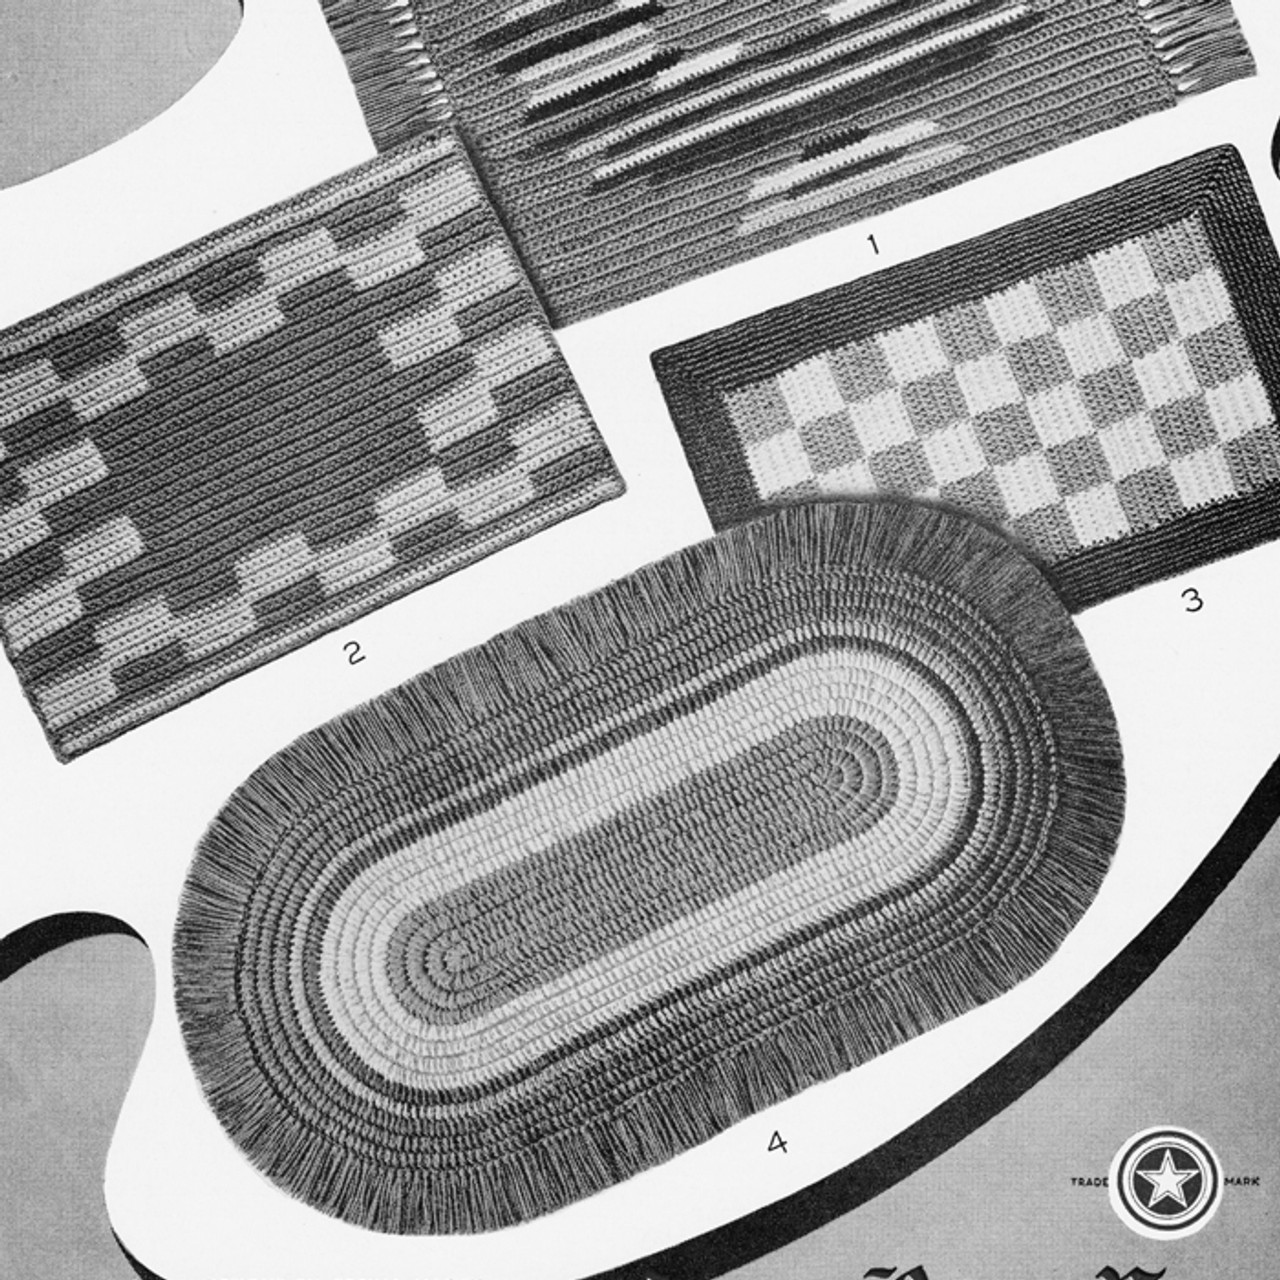 Oblong Checkerboard Area Rugs Pattern, Vintage 1950s